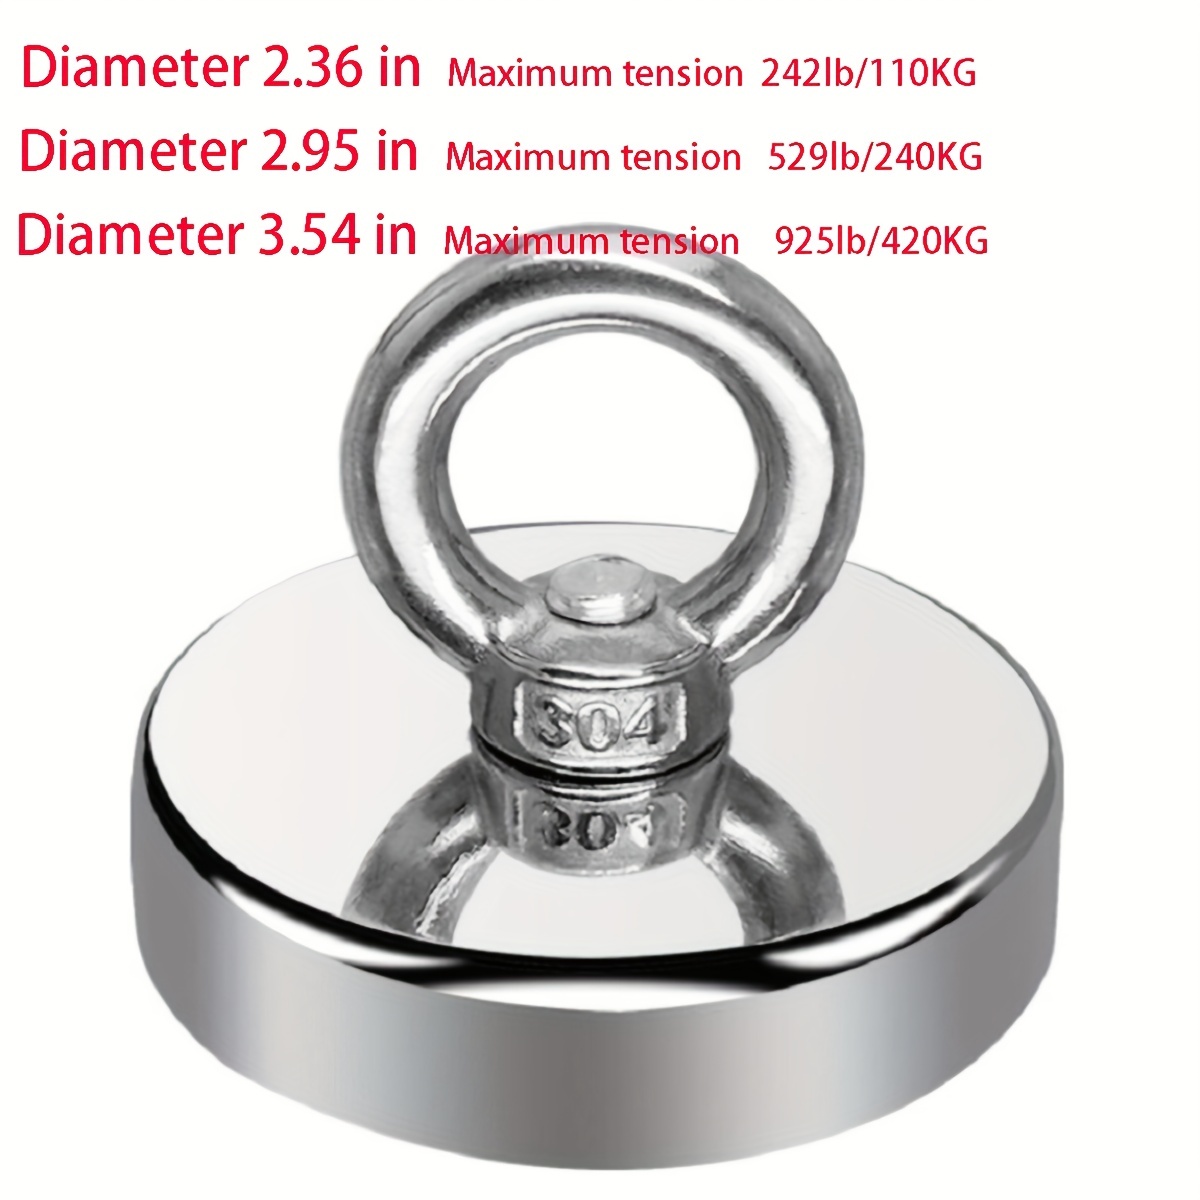 Super Strong Neodymium Fishing Magnets - Force Up To 600kg x 2 - Rare Earth Eyebolt Magnets - Pot Magnet With Eyelet - For Retrieving in River And